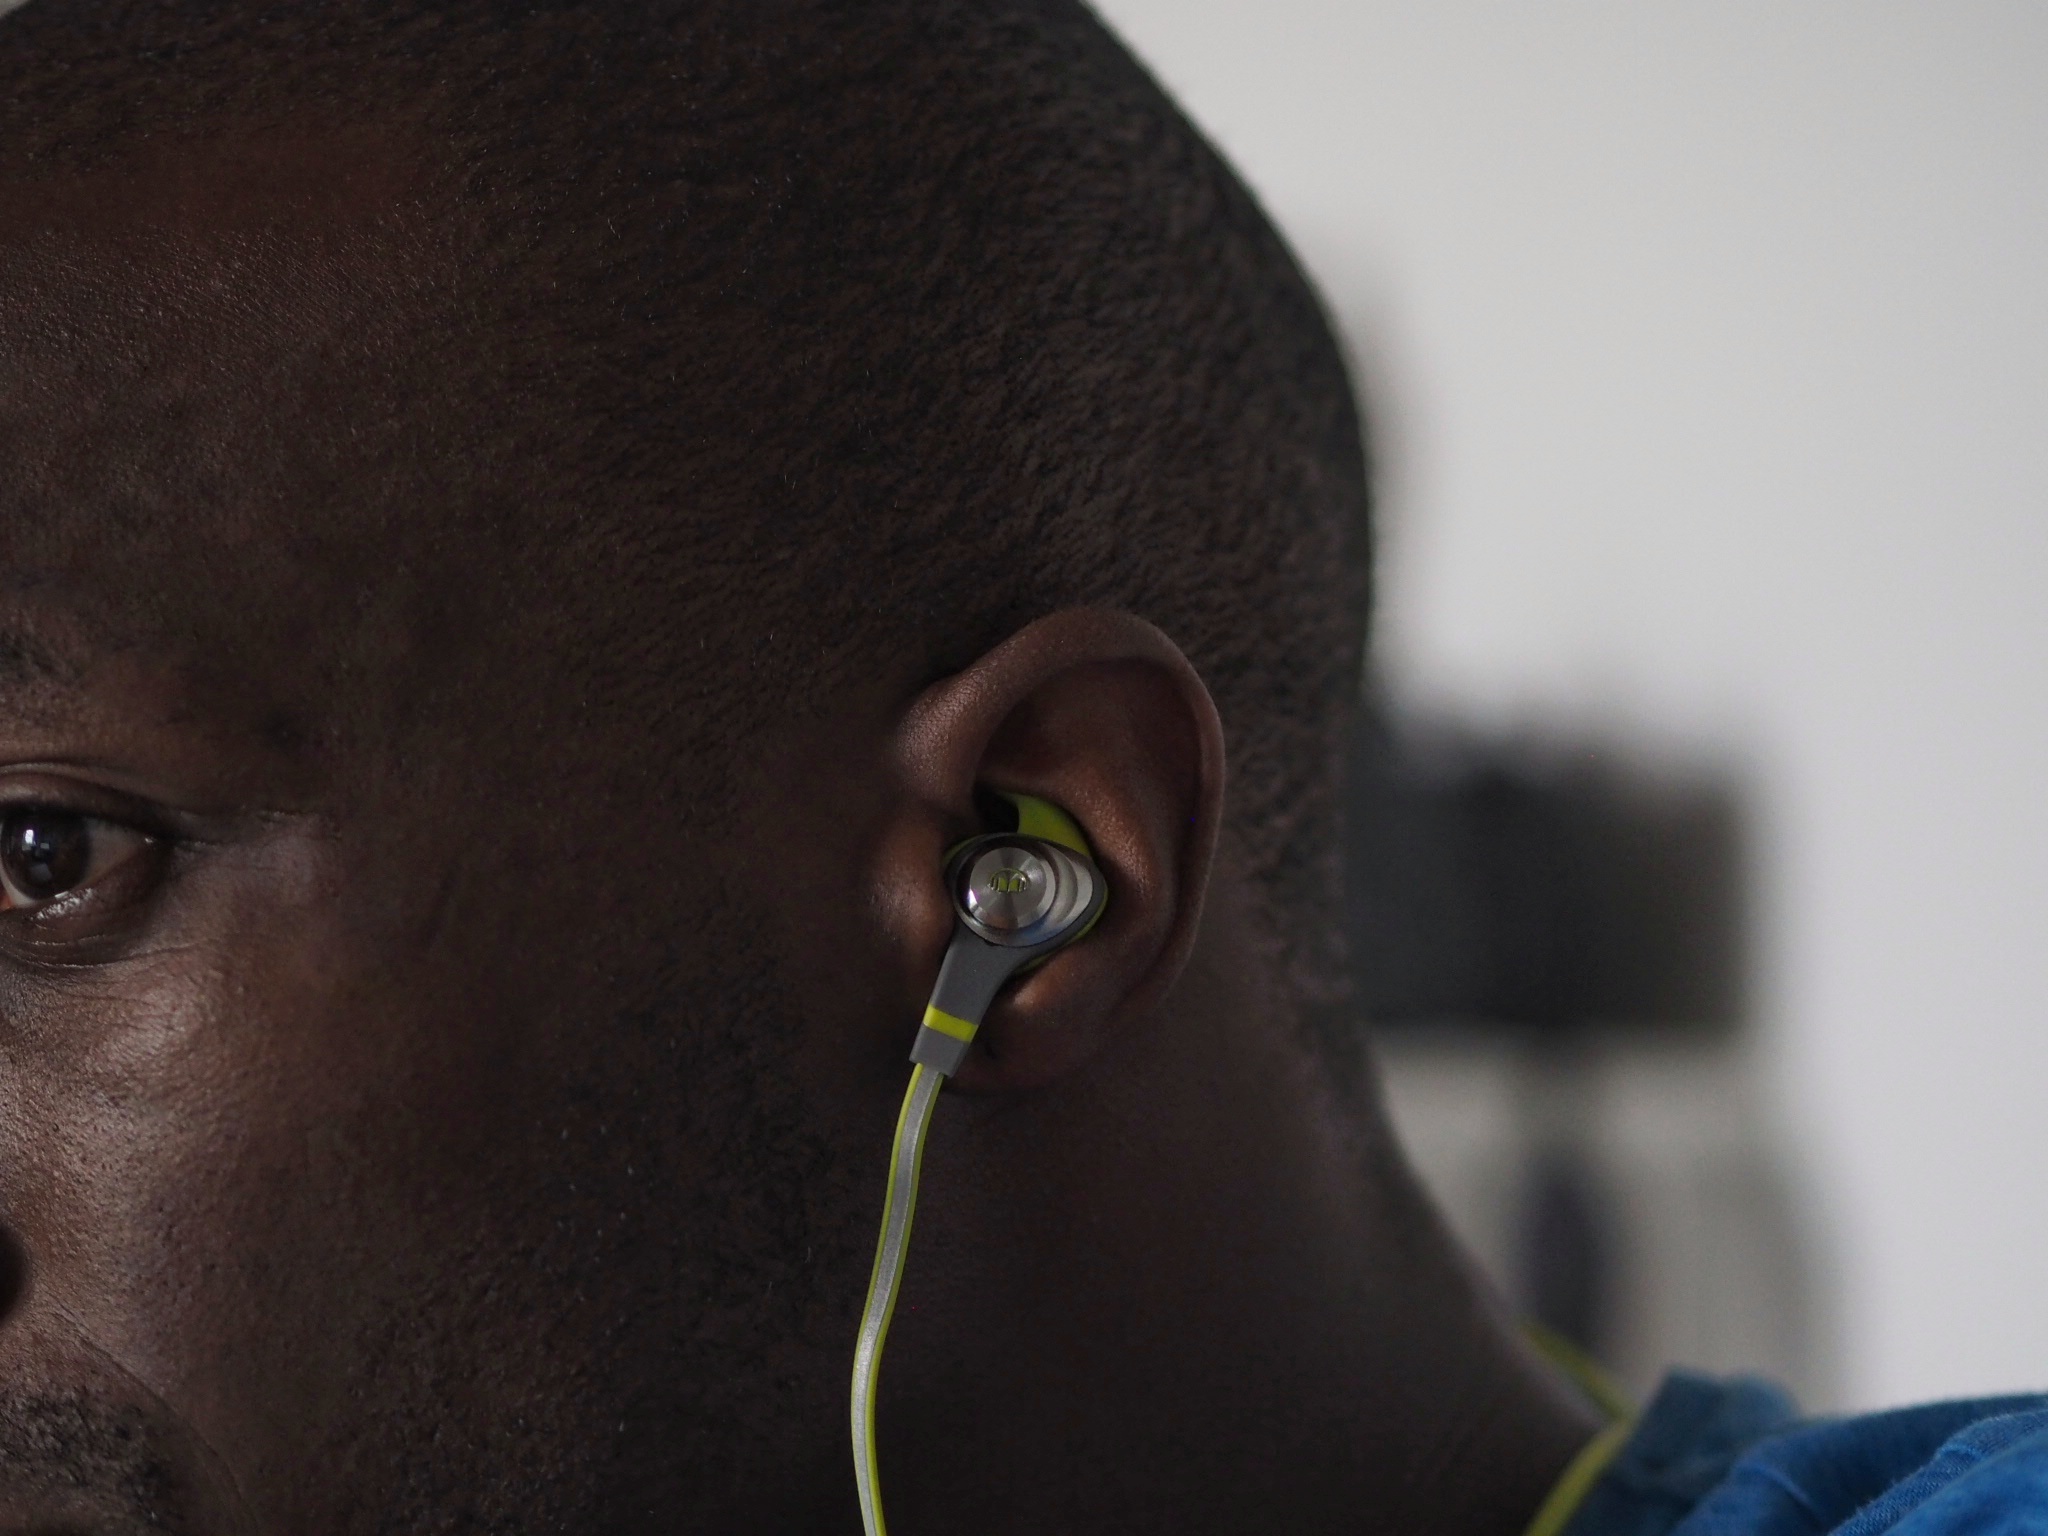 Train like a Monster with Monster ISport Hedphones